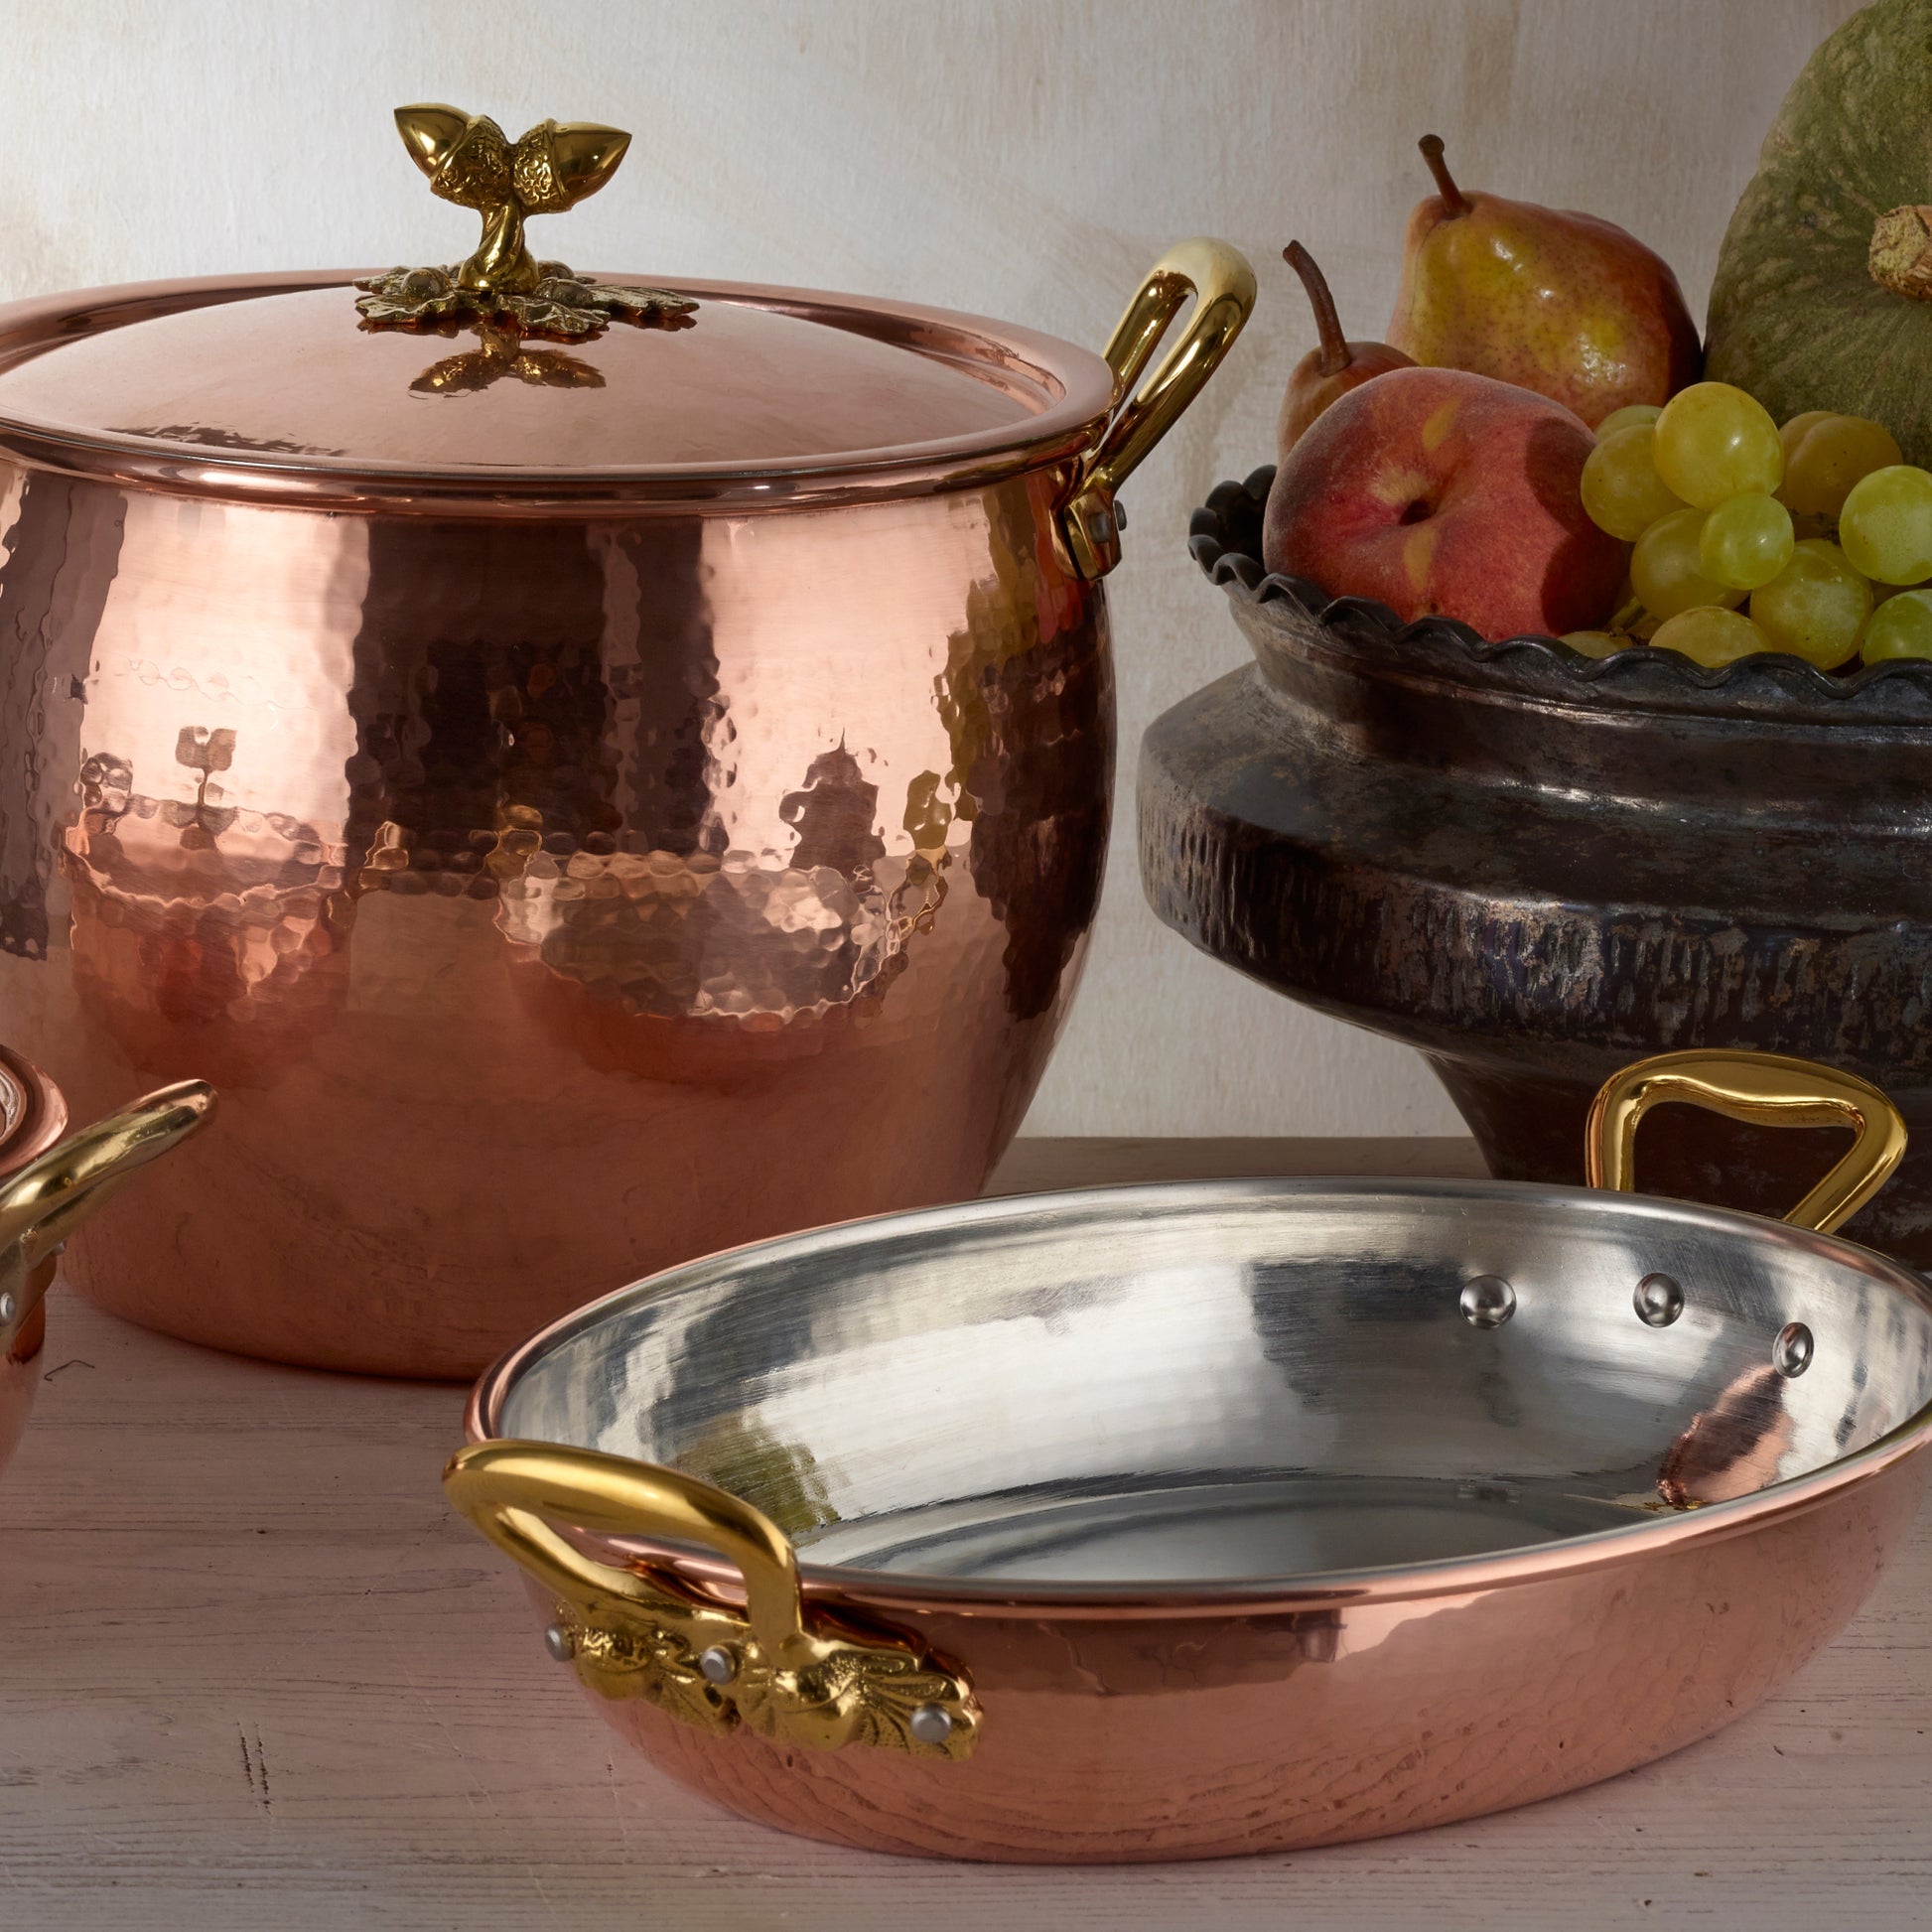 Hammered copper 14" Oval Gratin lined with high purity tin applied by hand over fire and bronze handles, from Ruffoni Historia collection